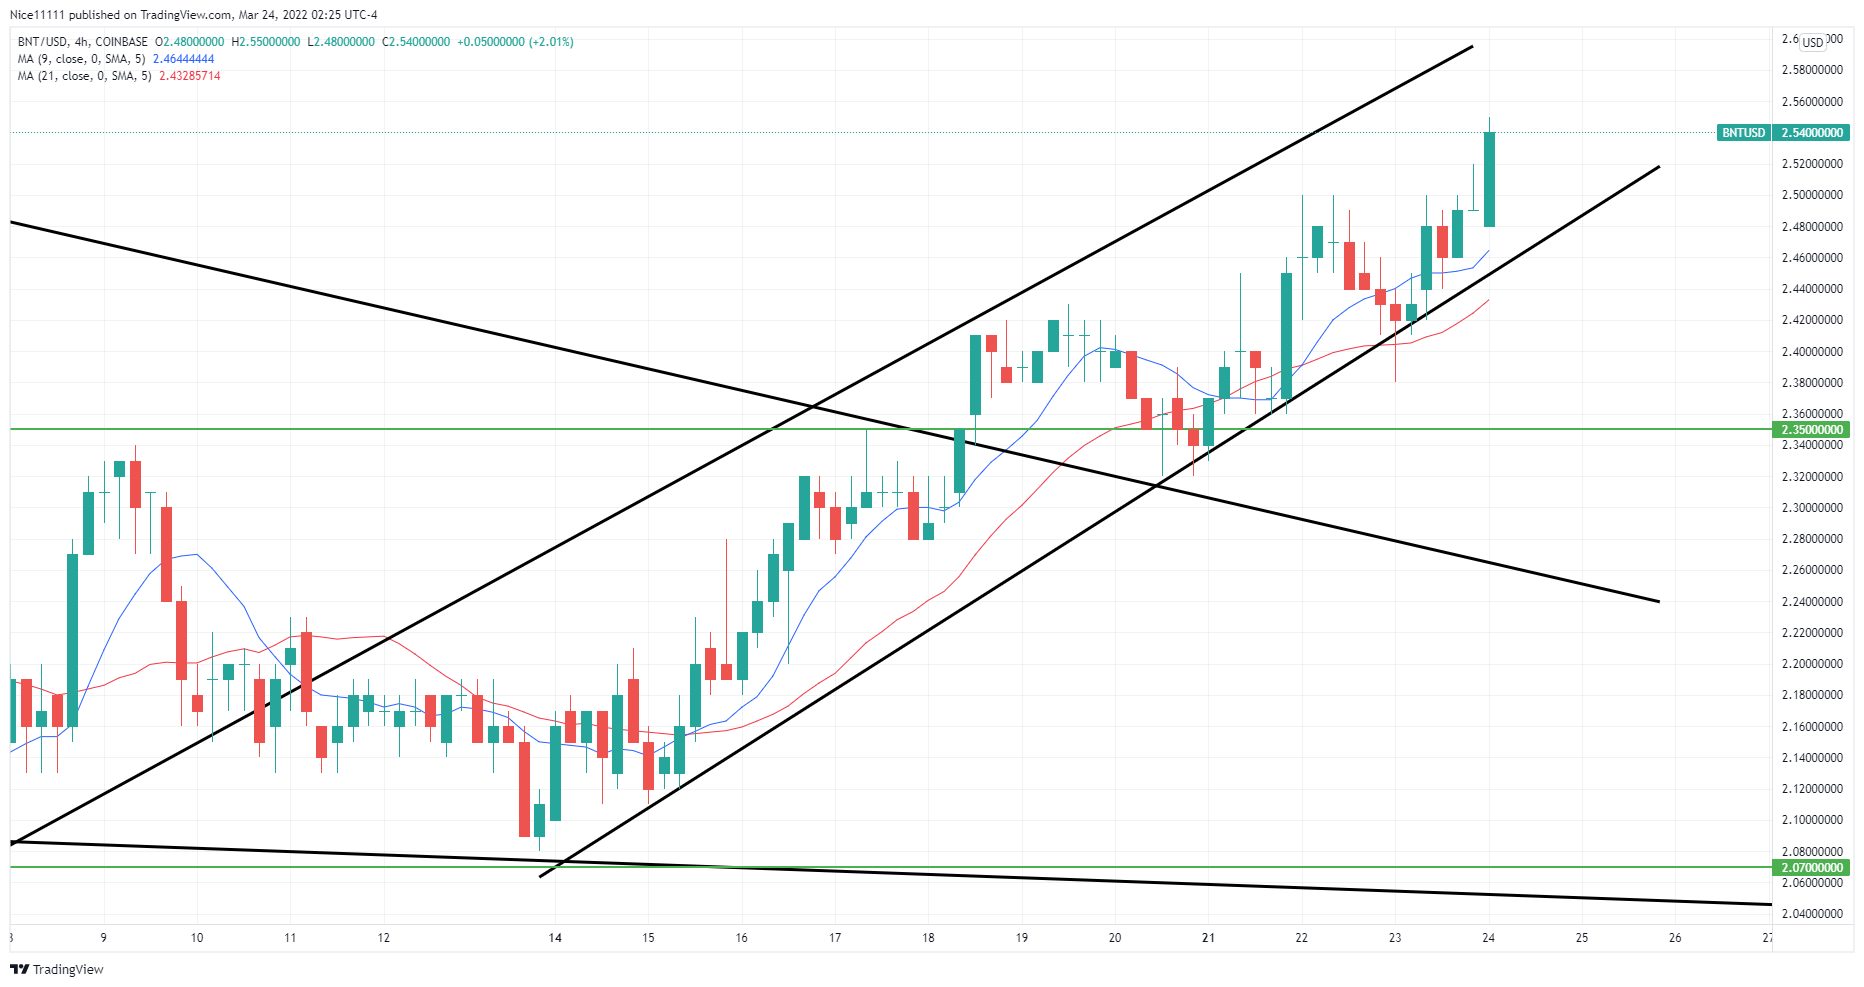 Bancor (BNTUSD) Makes a Successful Breakout in the Market